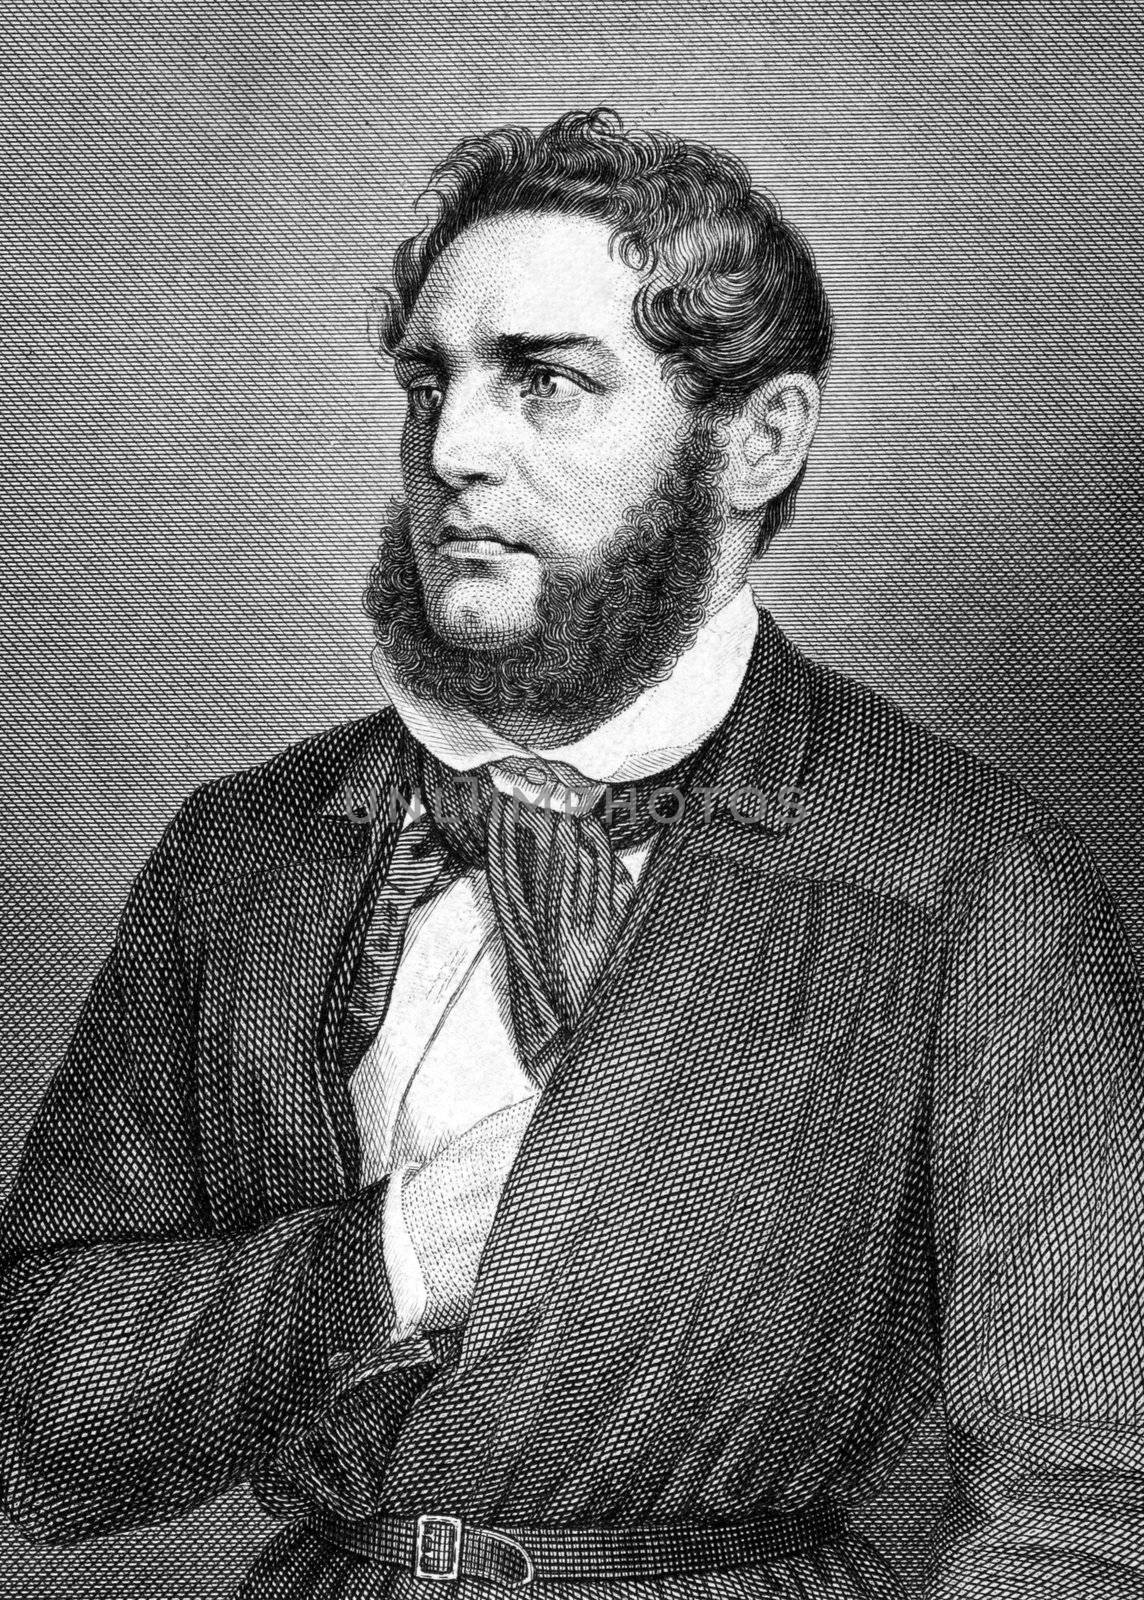 Franz Heinrich Zitz (1803-1877) on engraving from 1859. German attorney. Engraved by unknown artist and published in Meyers Konversations-Lexikon, Germany,1859.